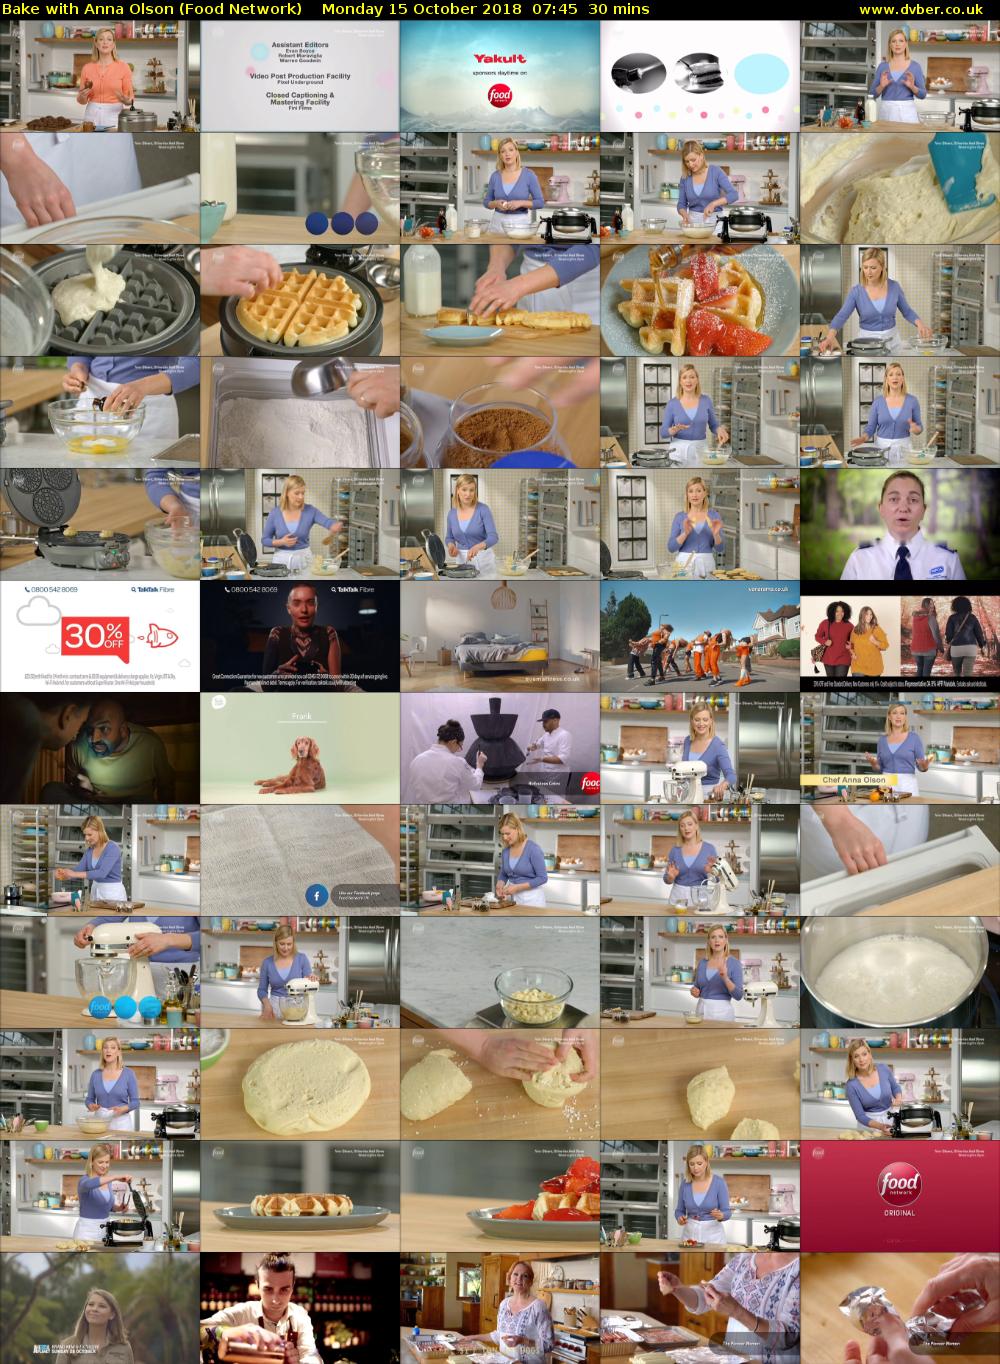 Bake with Anna Olson (Food Network) Monday 15 October 2018 07:45 - 08:15